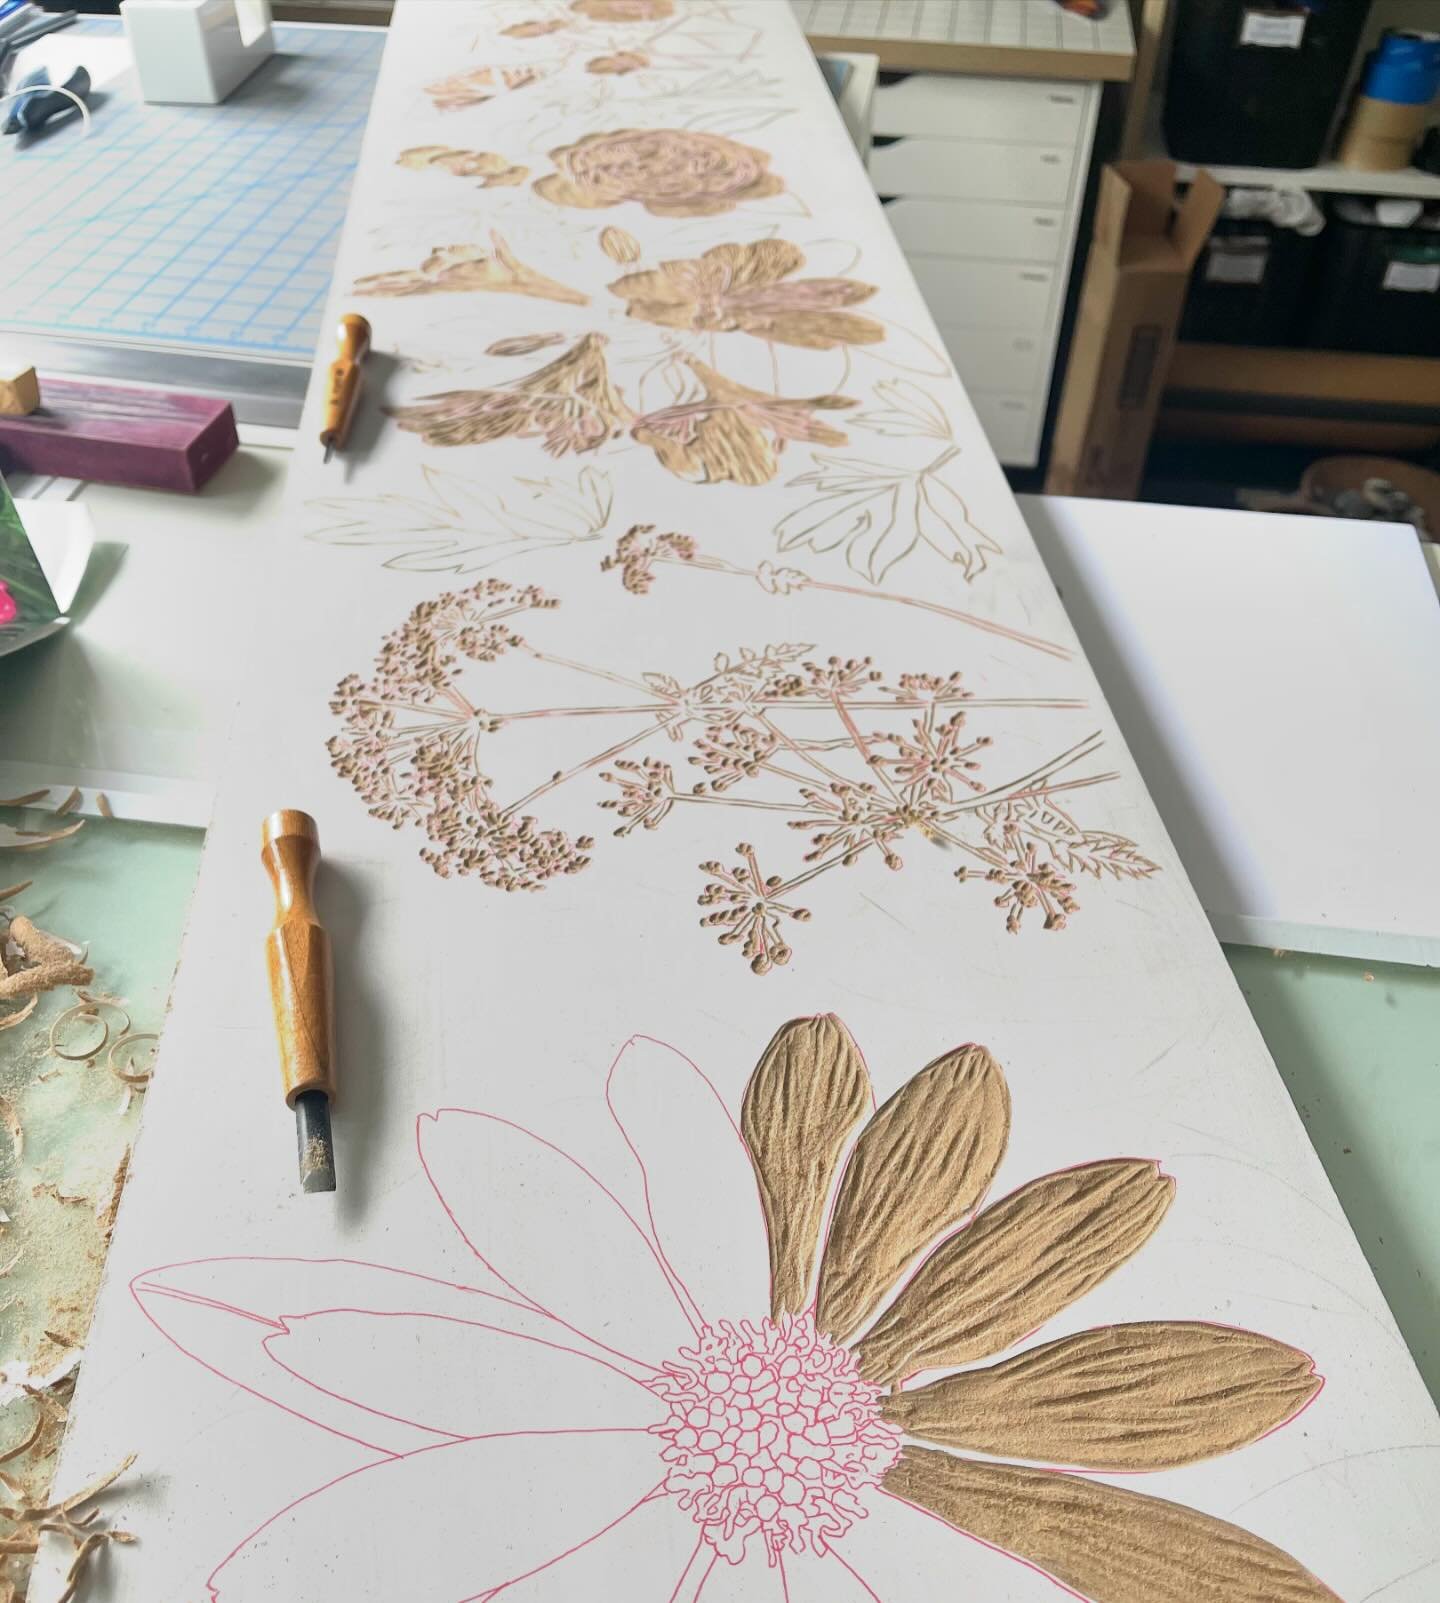 Back in the studio between shows. Working on a large scale piece to be printed in the street on May 25 in front of the Lawrence Arts Center. It should be a fun day - lots of big art being made by our team of printmakers. 
.
.
.
.
.
.
.
.
.
.
.
.

#pr